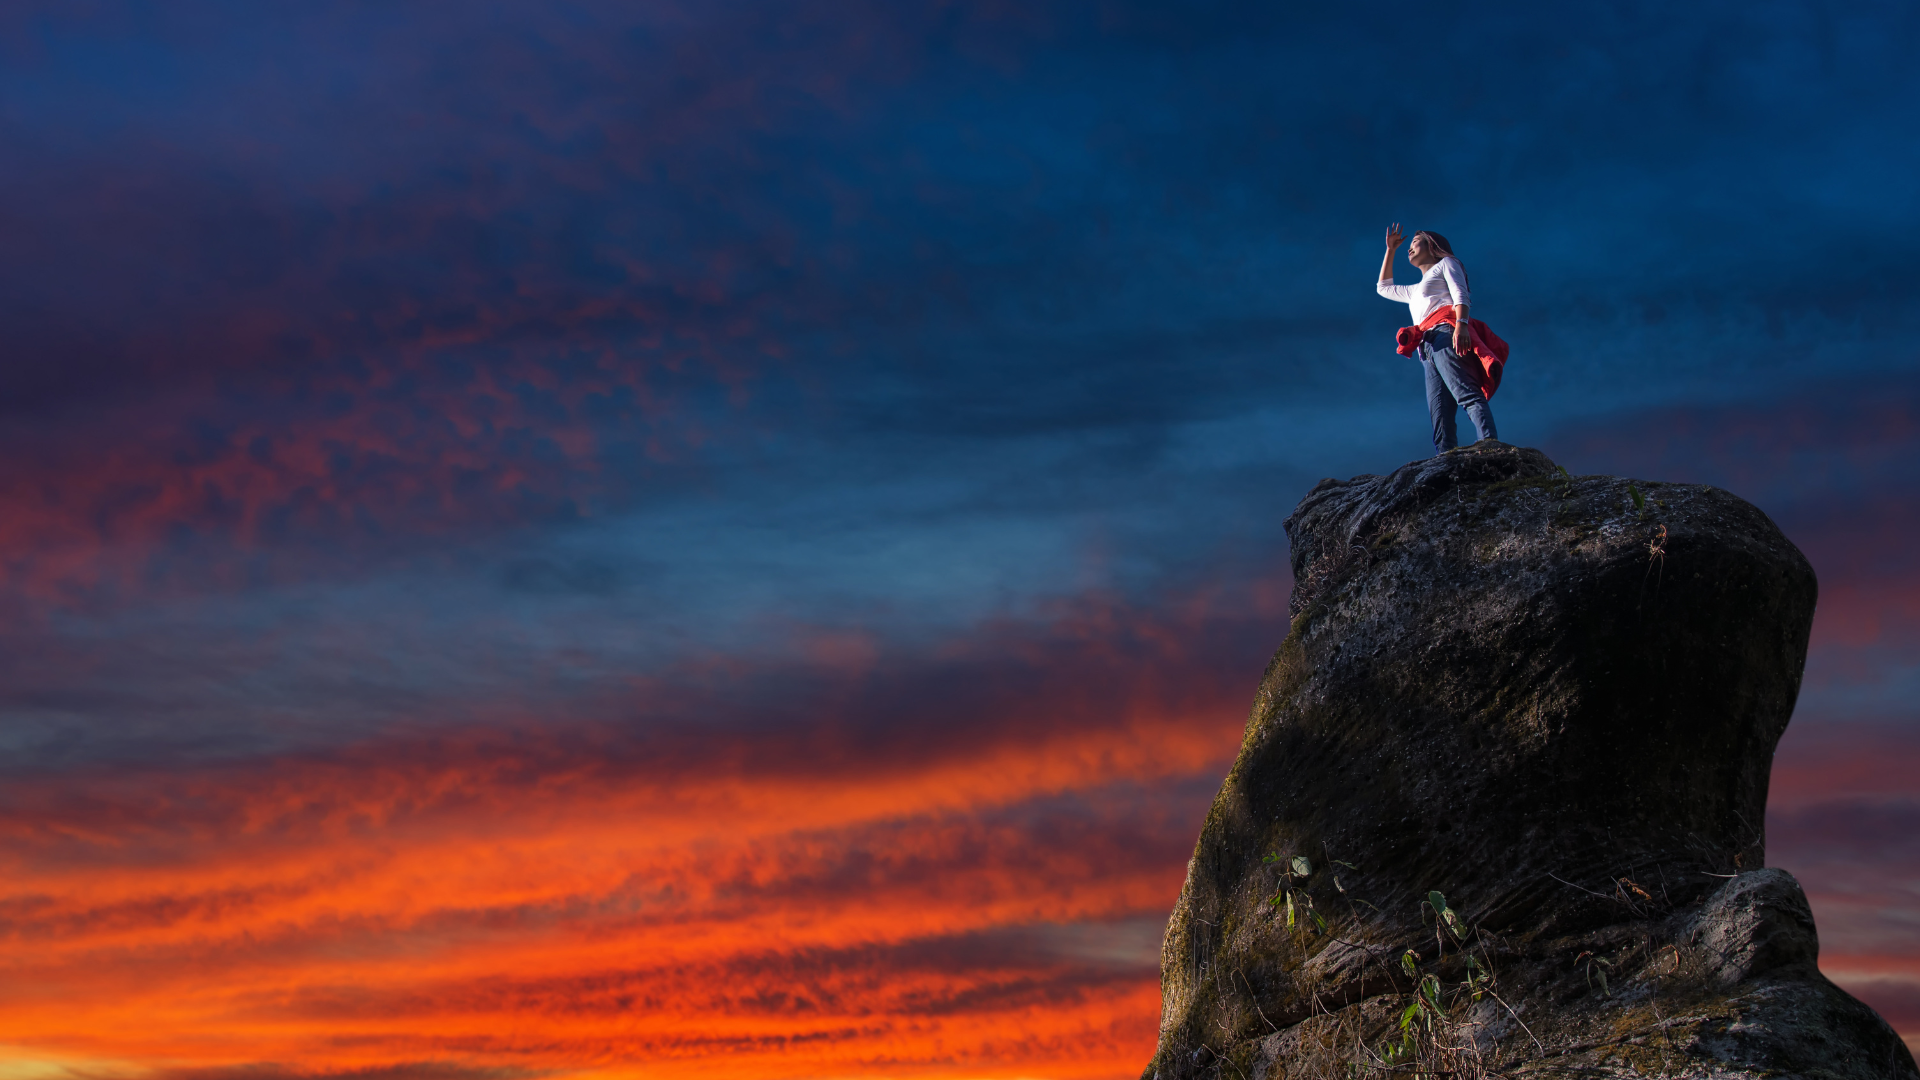 A woman stands on a large boulder and looks into the distance. In the background, the dark blue and orange colors of a sunset appear on the clouds in the sky.